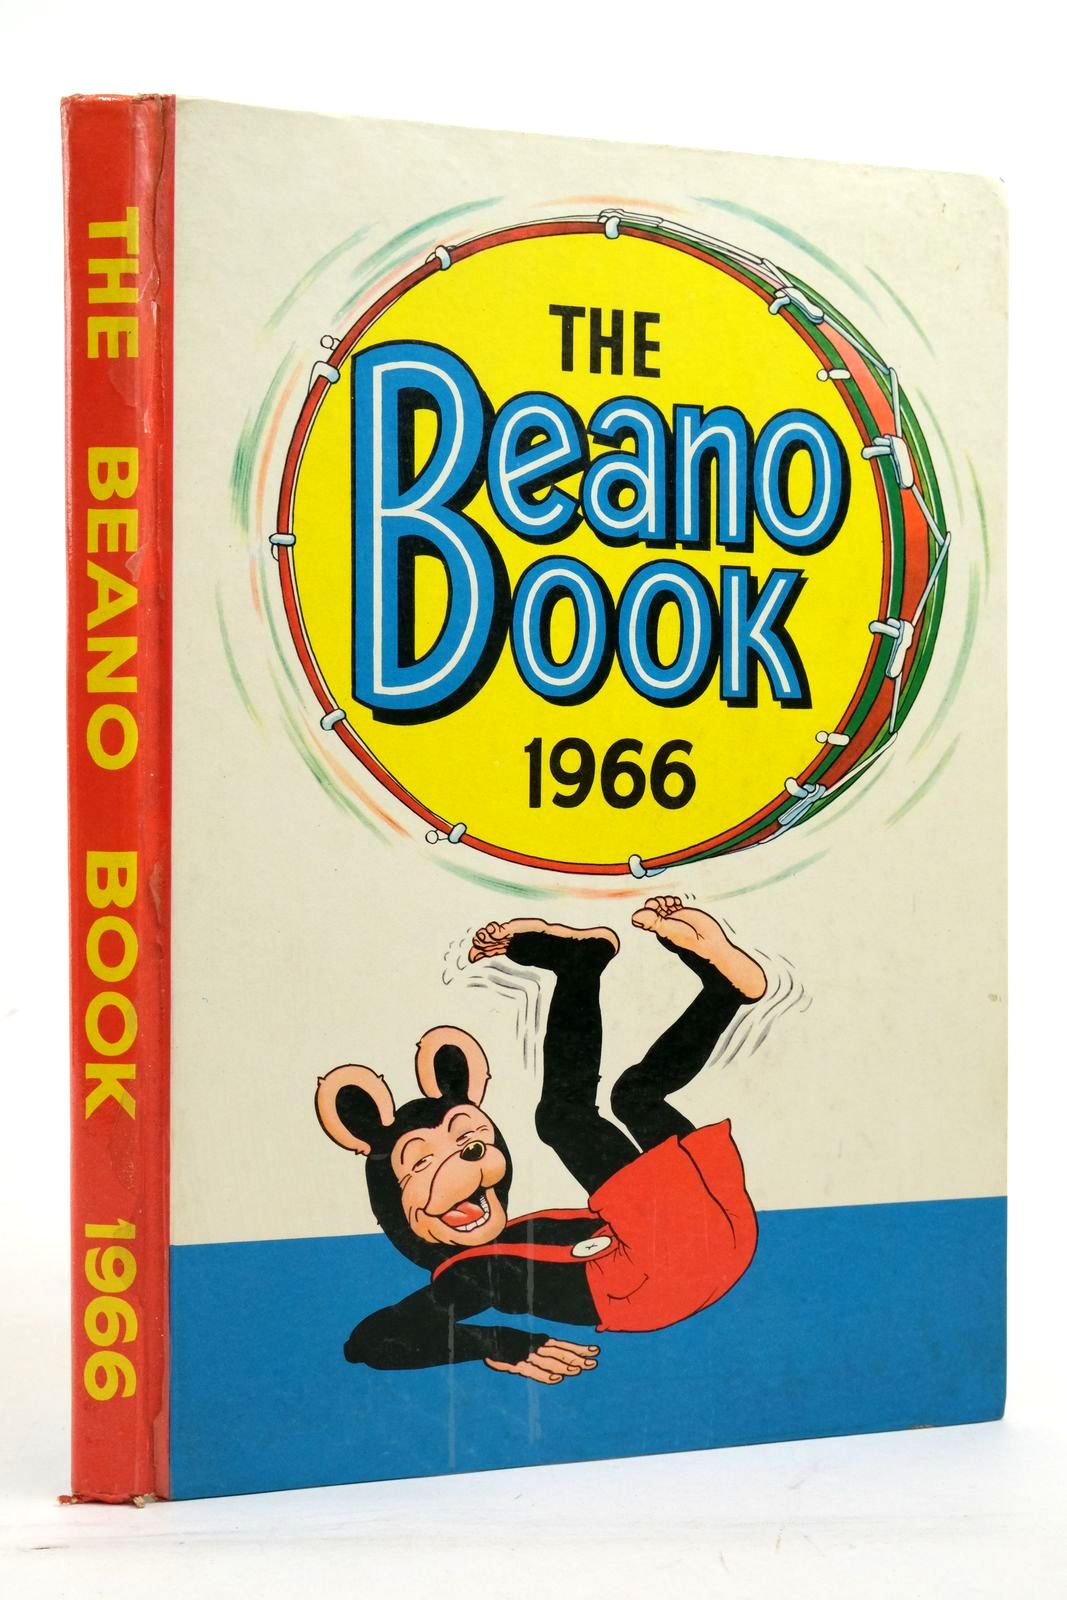 Photo of THE BEANO BOOK 1966 published by D.C. Thomson &amp; Co Ltd. (STOCK CODE: 2137950)  for sale by Stella & Rose's Books